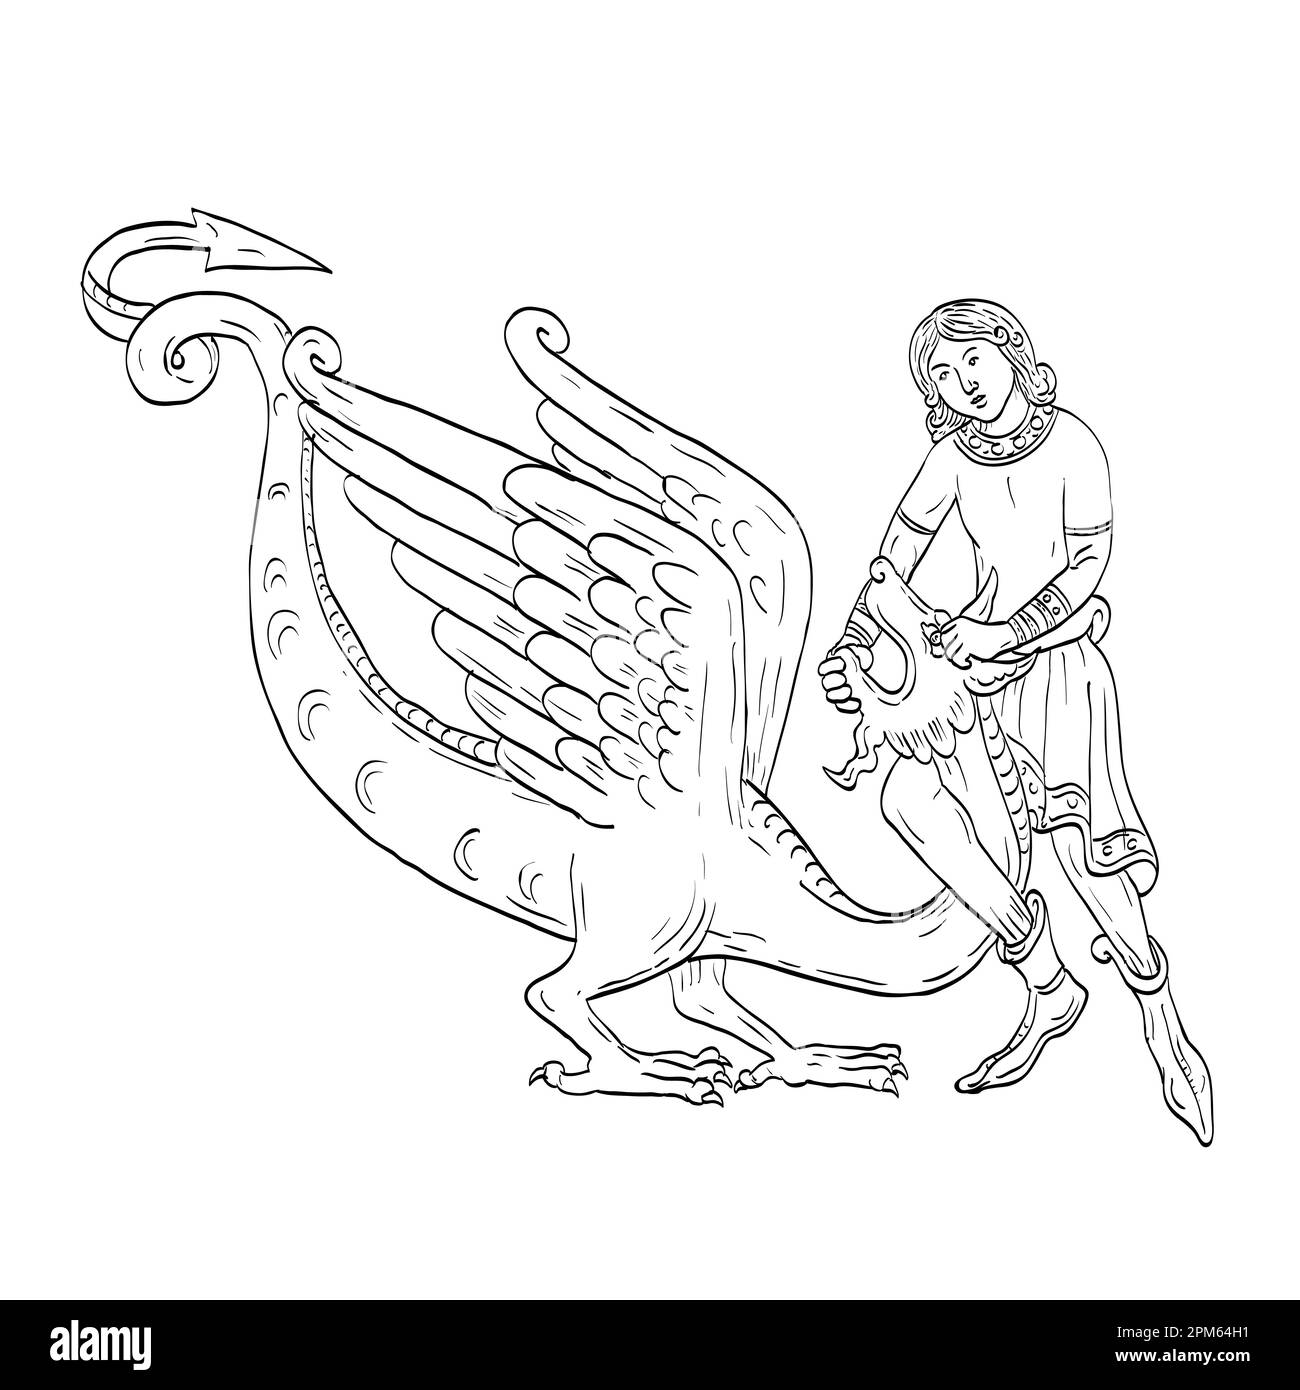 Line art drawing illustration of Saint George fighting the dragon done in medieval style on isolated background in black and white. Stock Photo